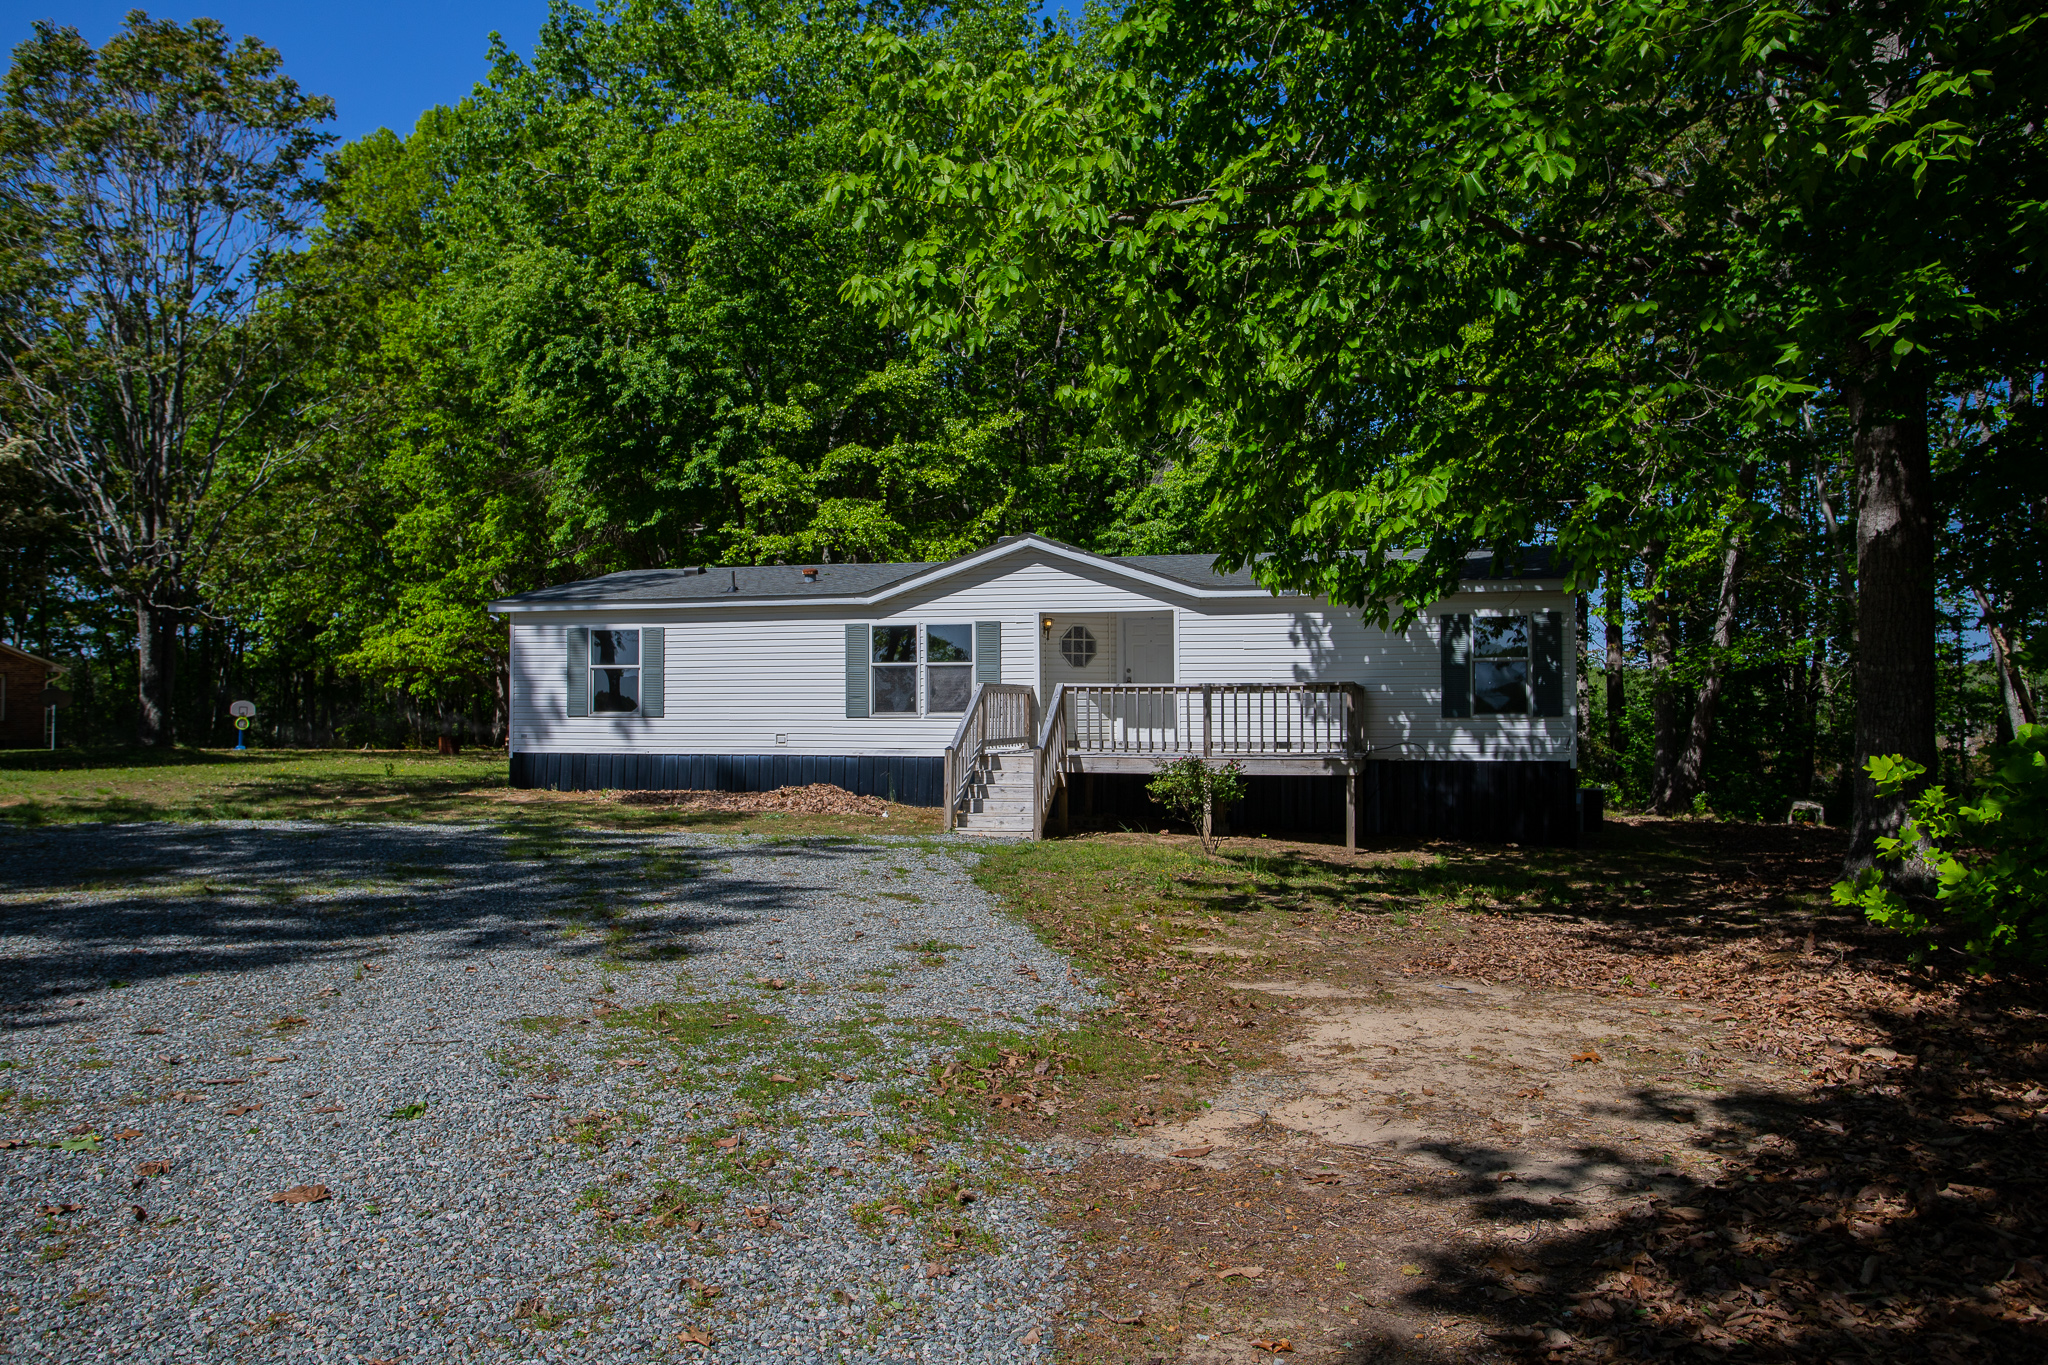 Home for Sale in Halifax County! 1156 Wilson Memorial Trail